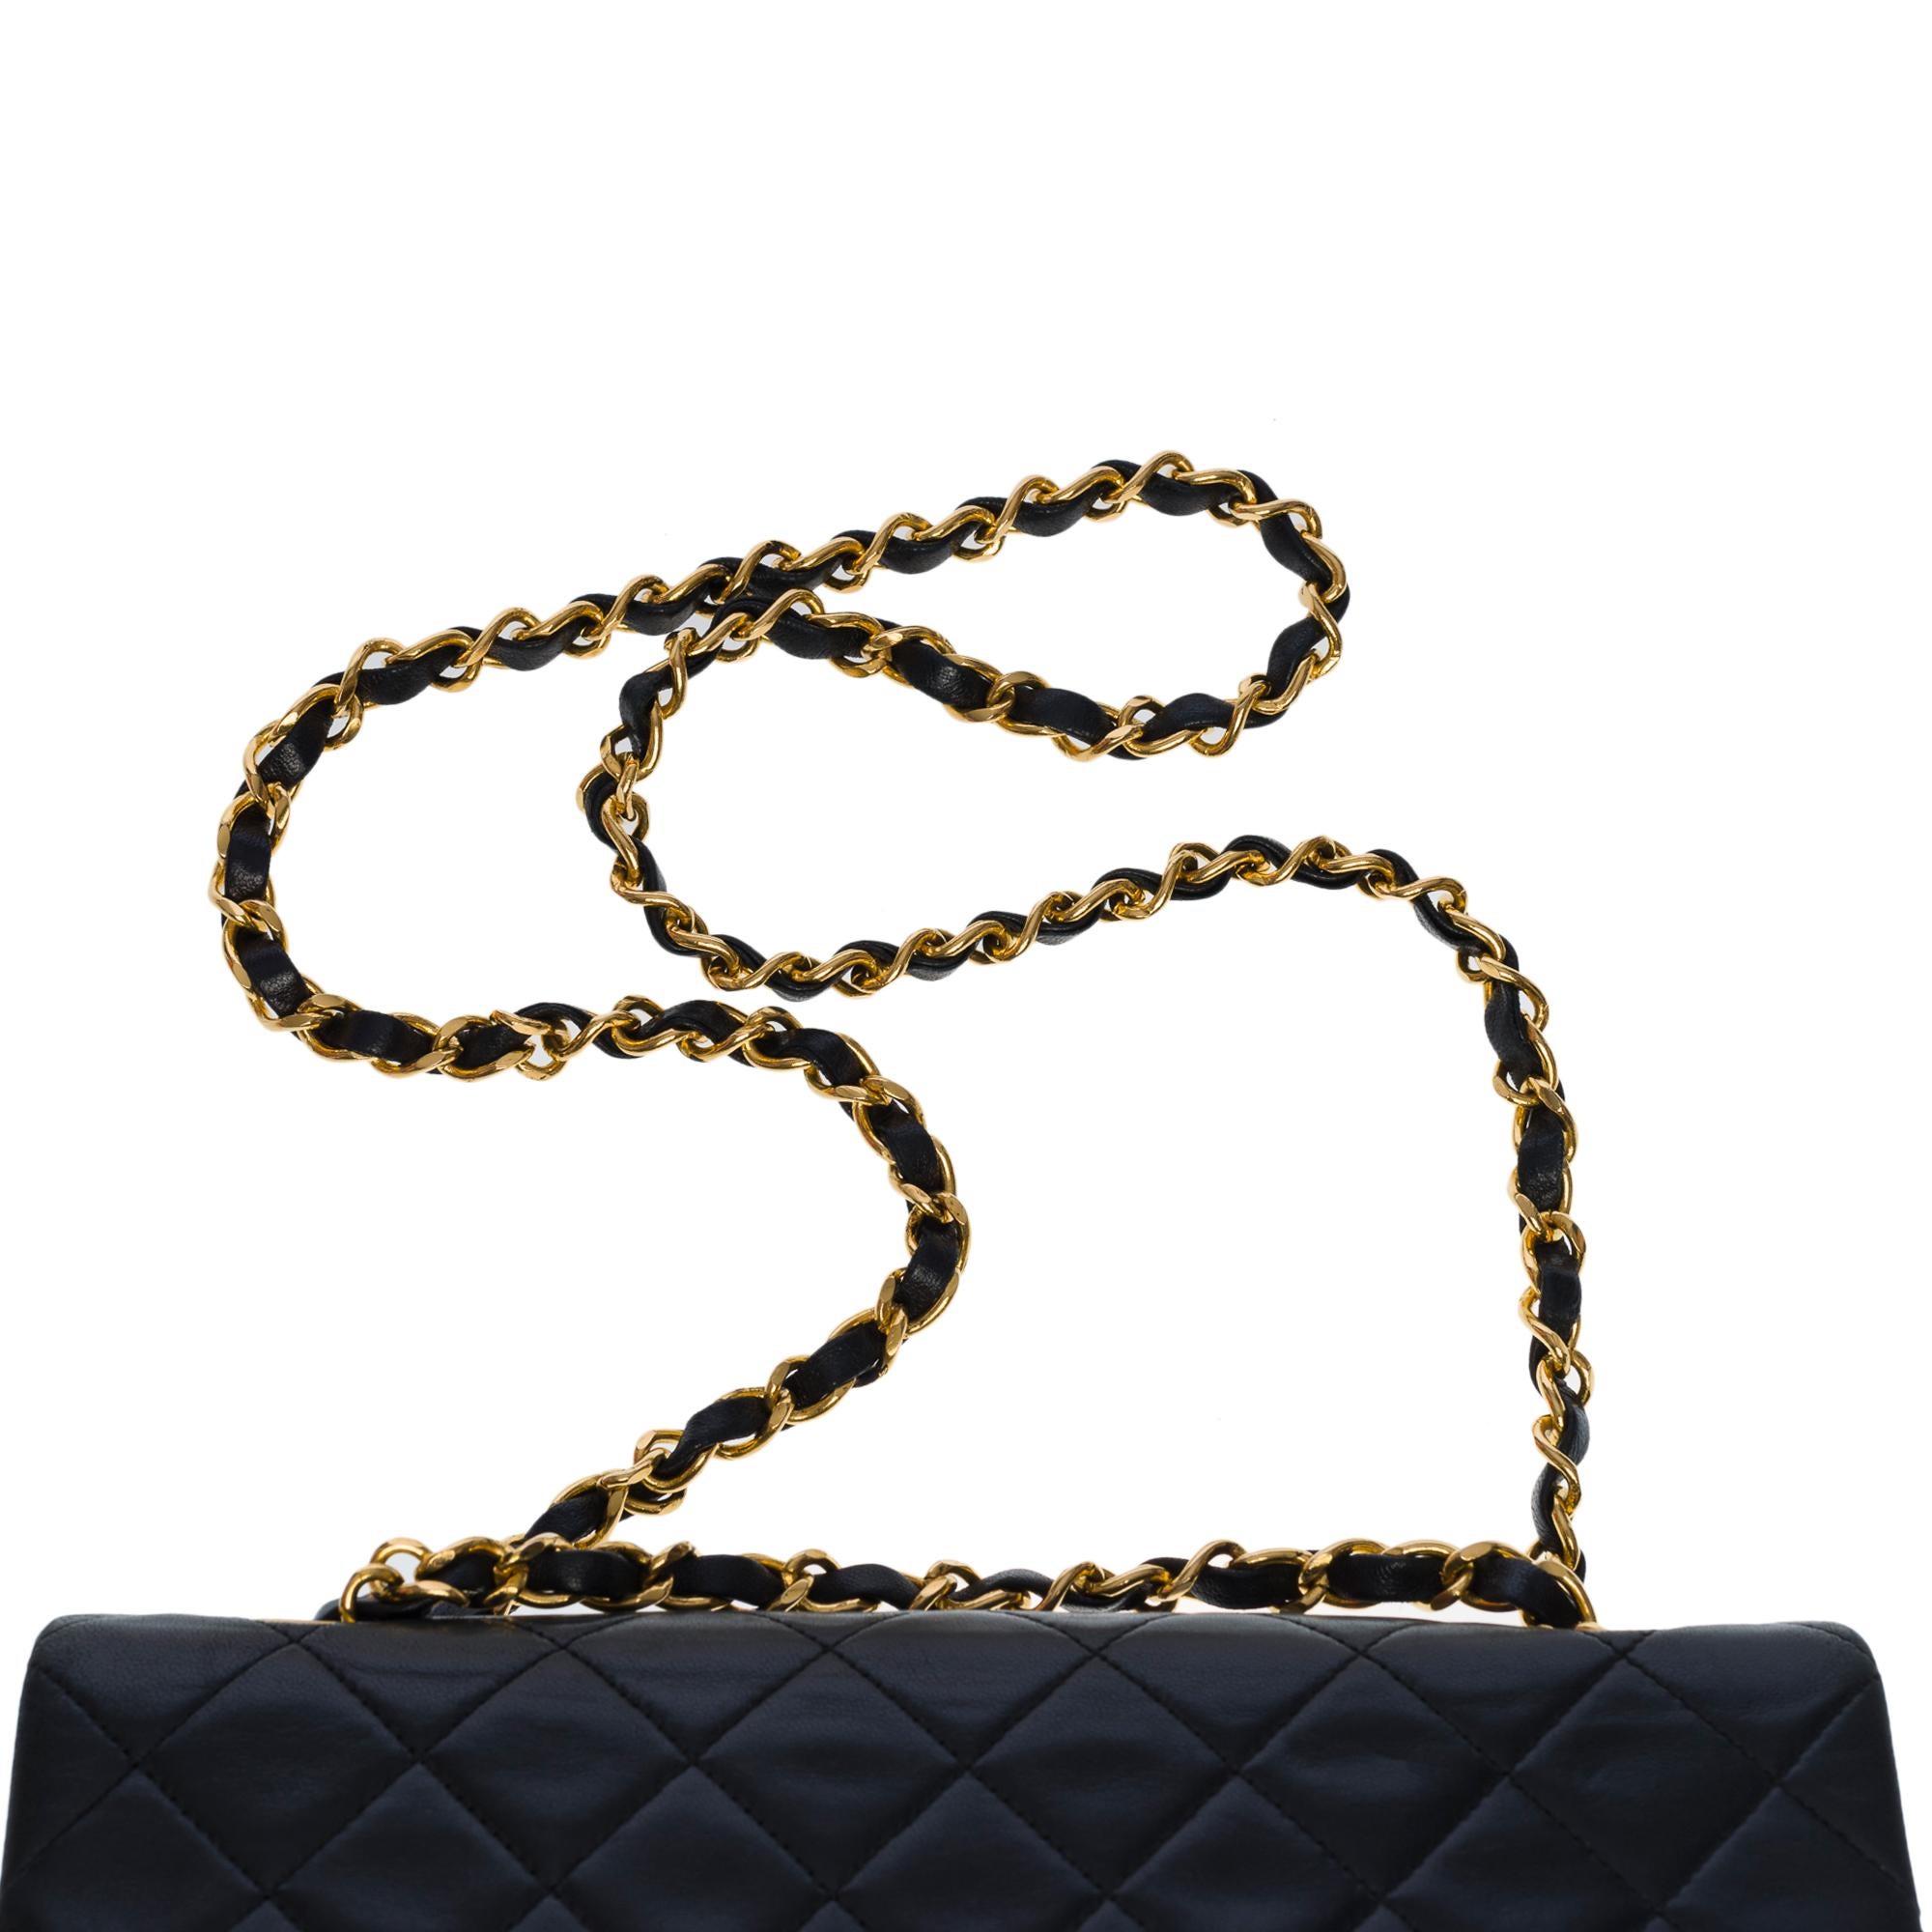 Chanel Timeless 23cm double flap shoulder bag in black quilted lambskin, GHW 4